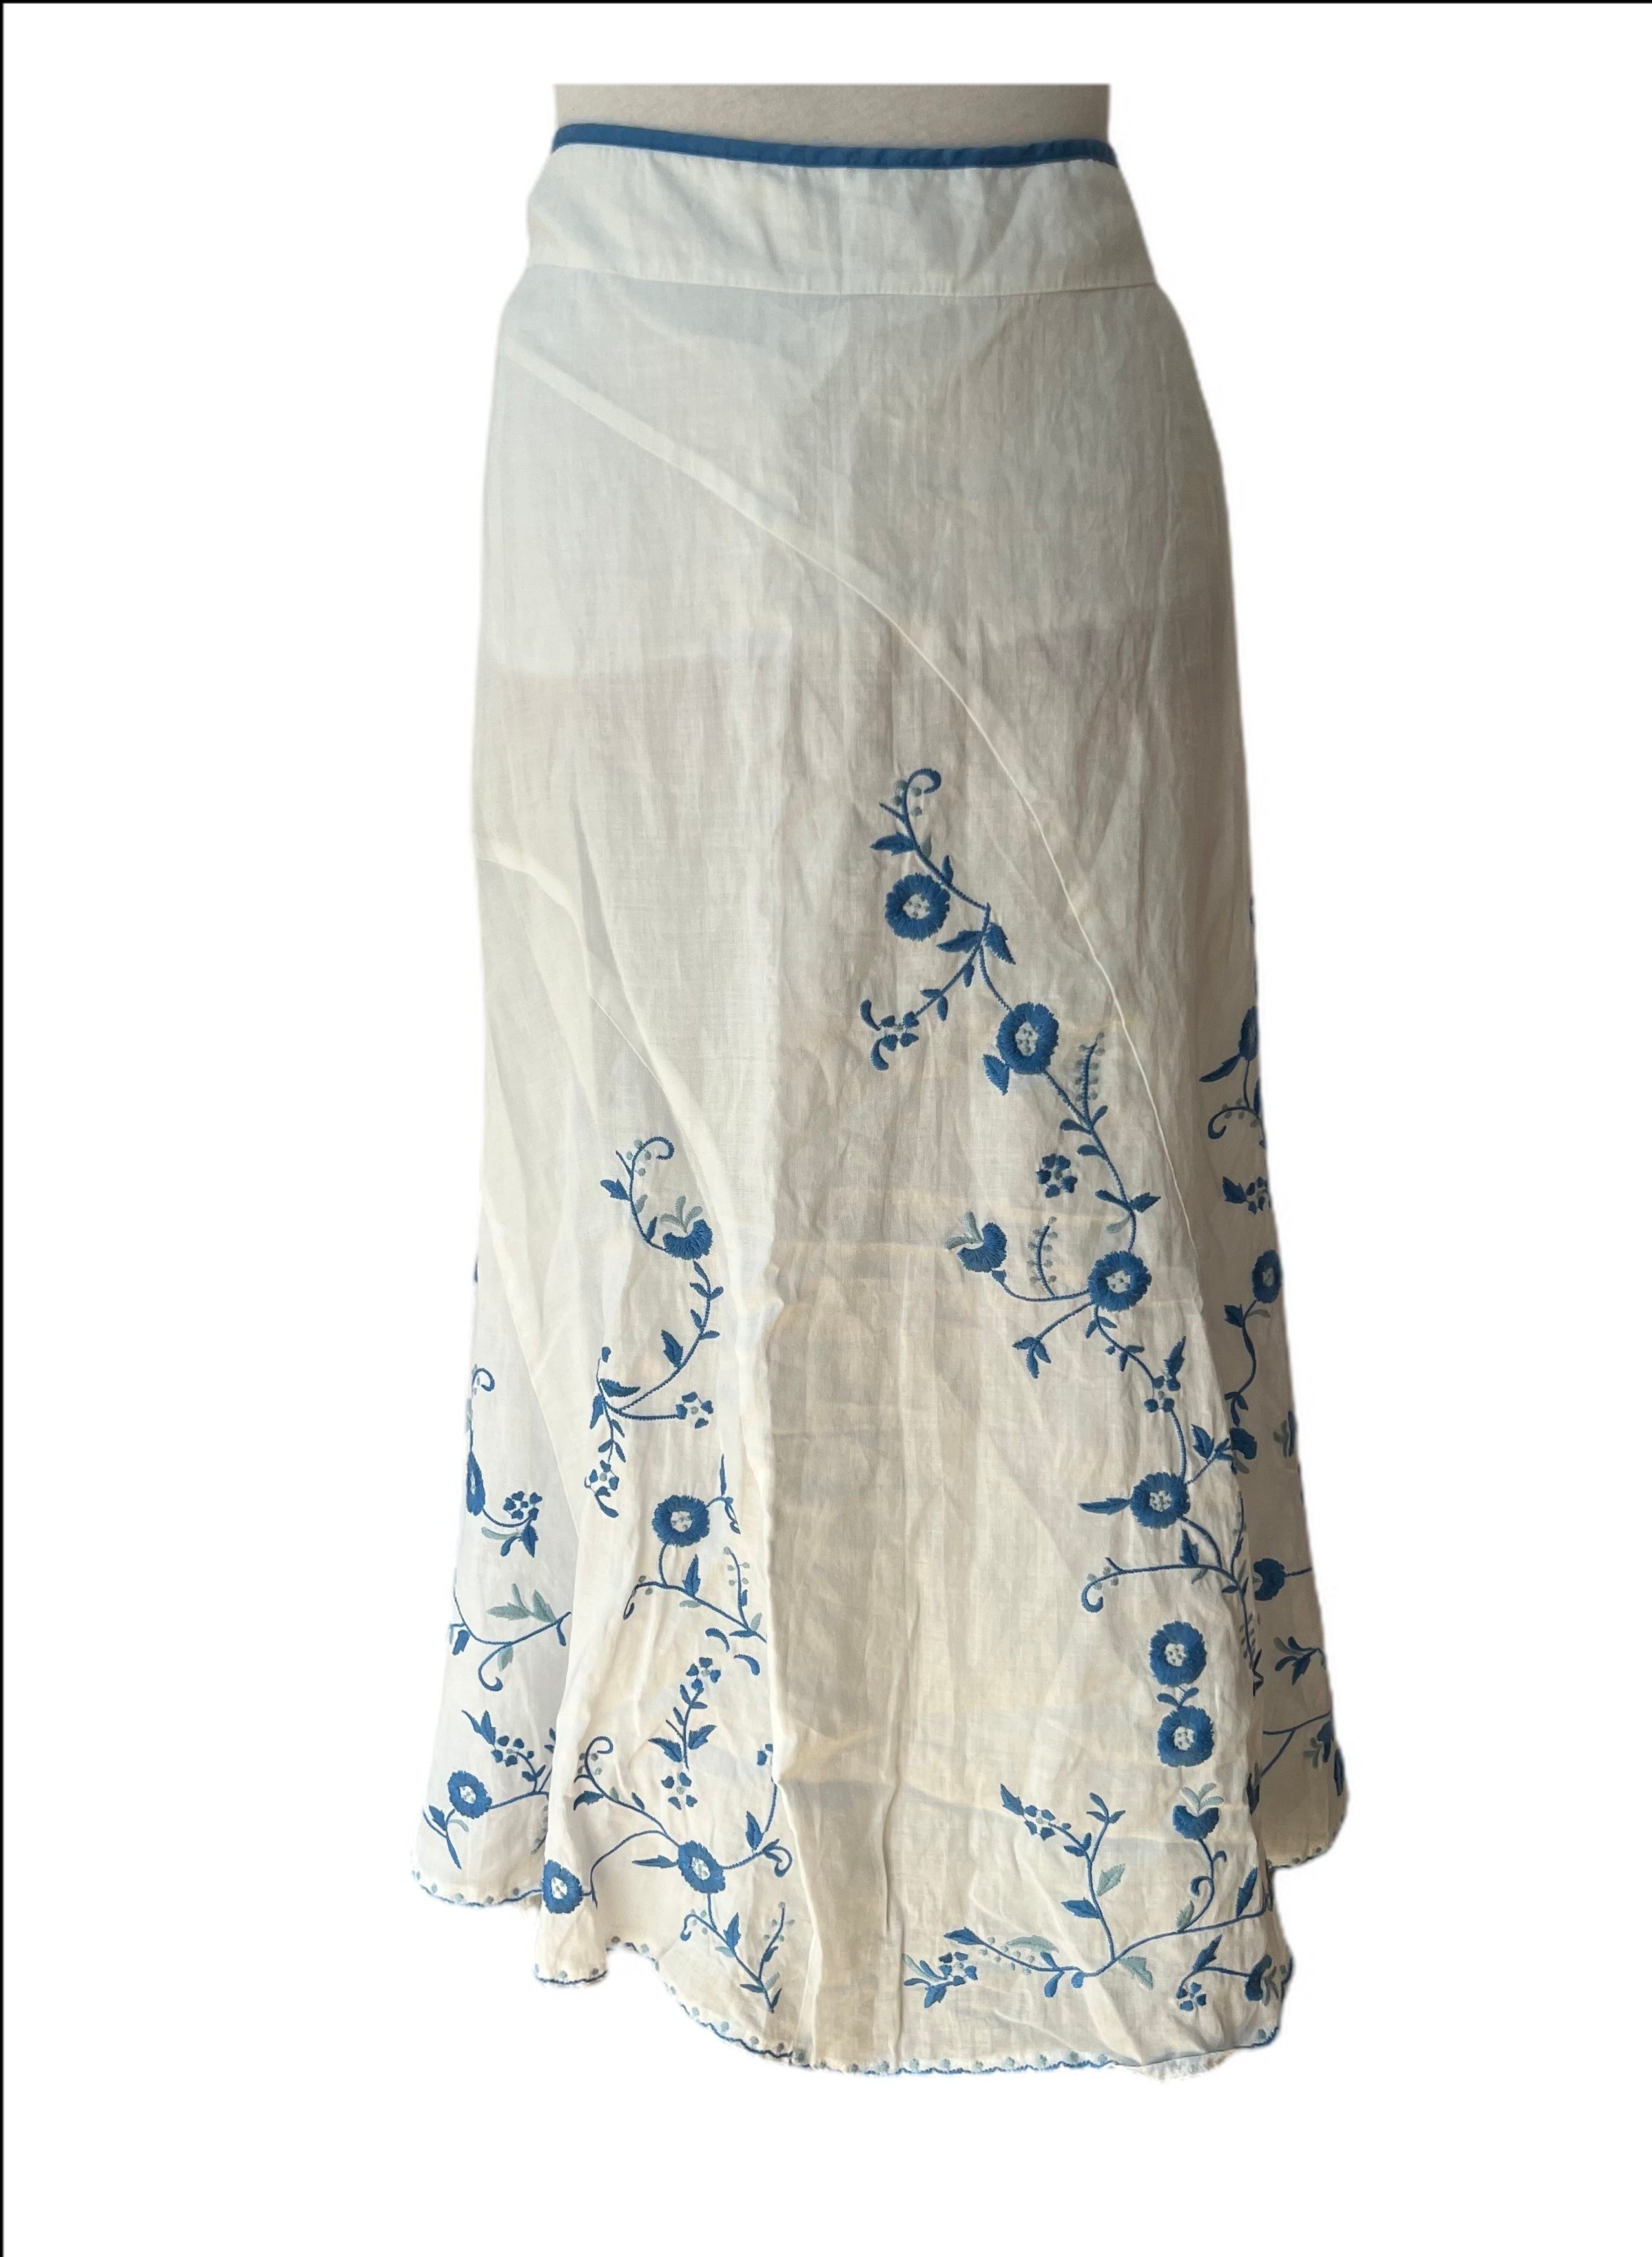 Long skirt with embroidered flowers